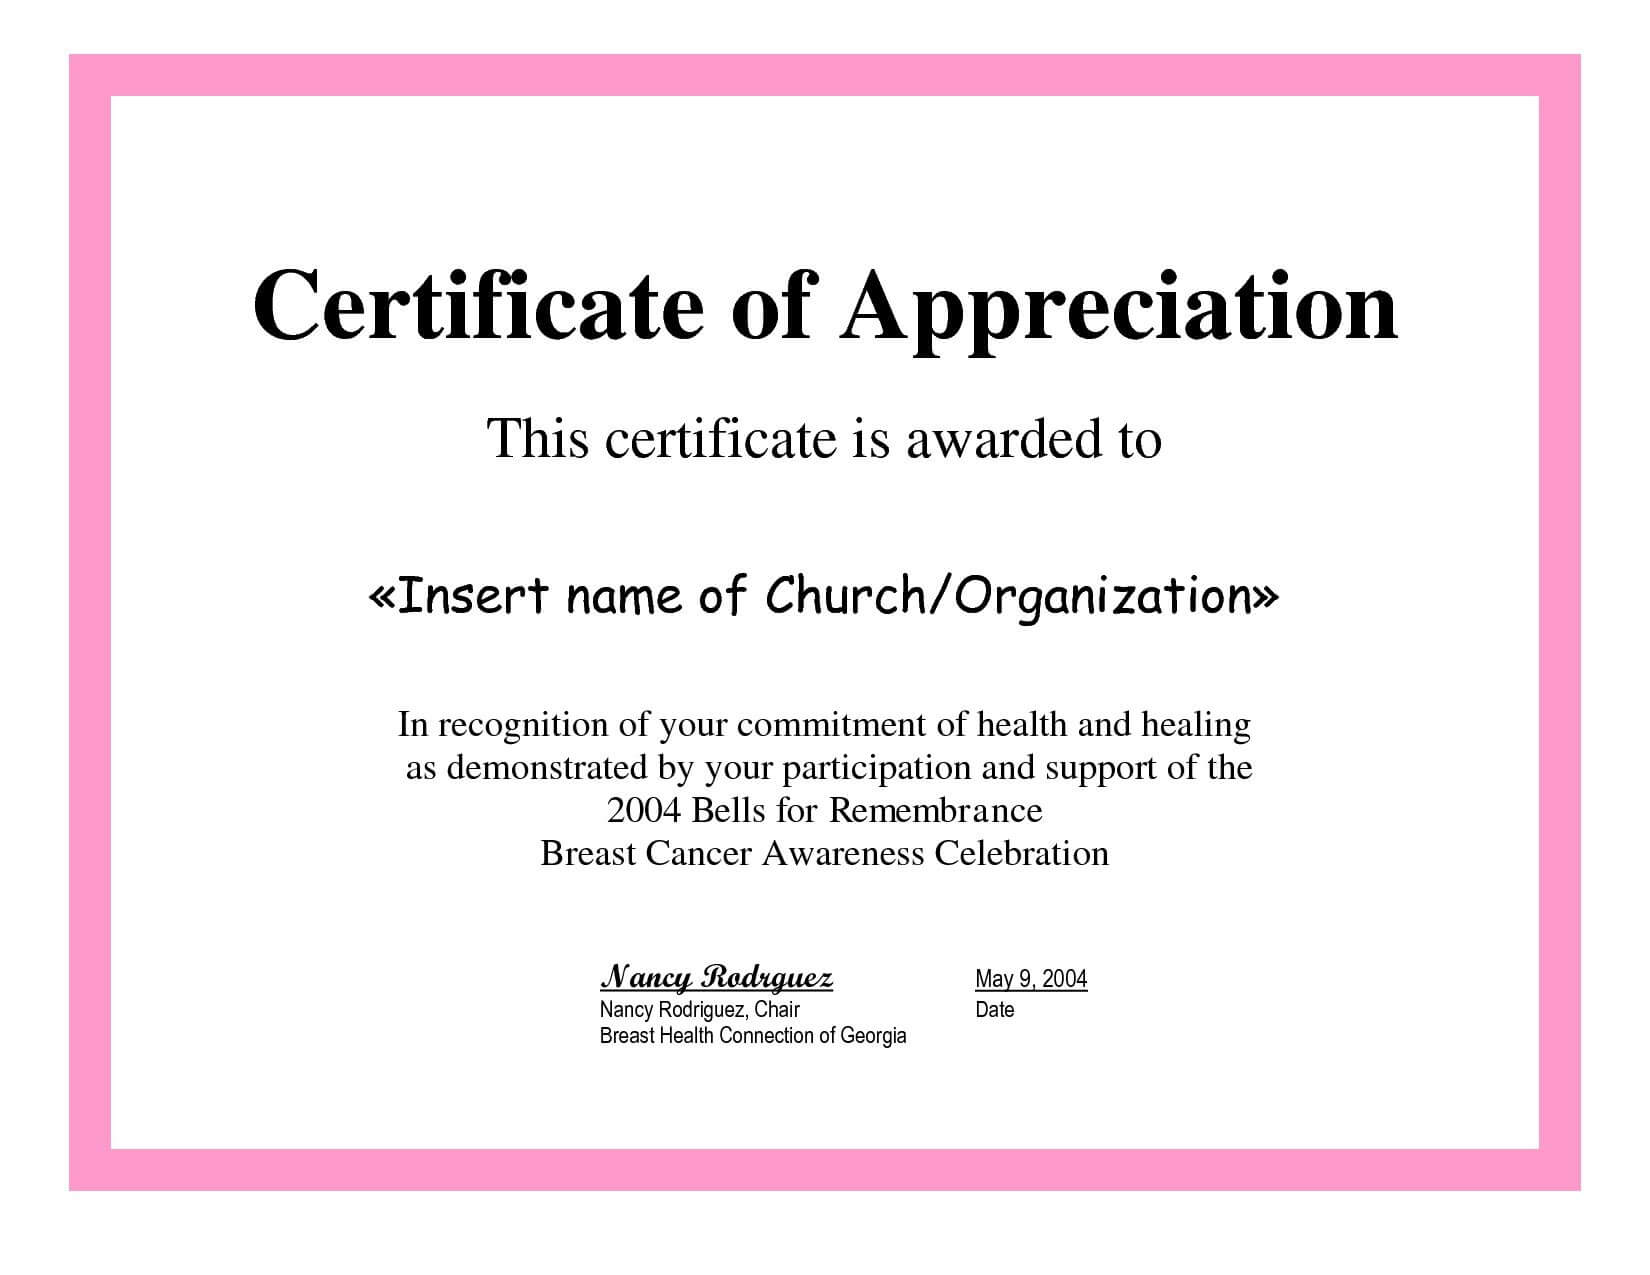 Employee Appreciation Certificate Template Free Recognition Within Recognition Of Service Certificate Template